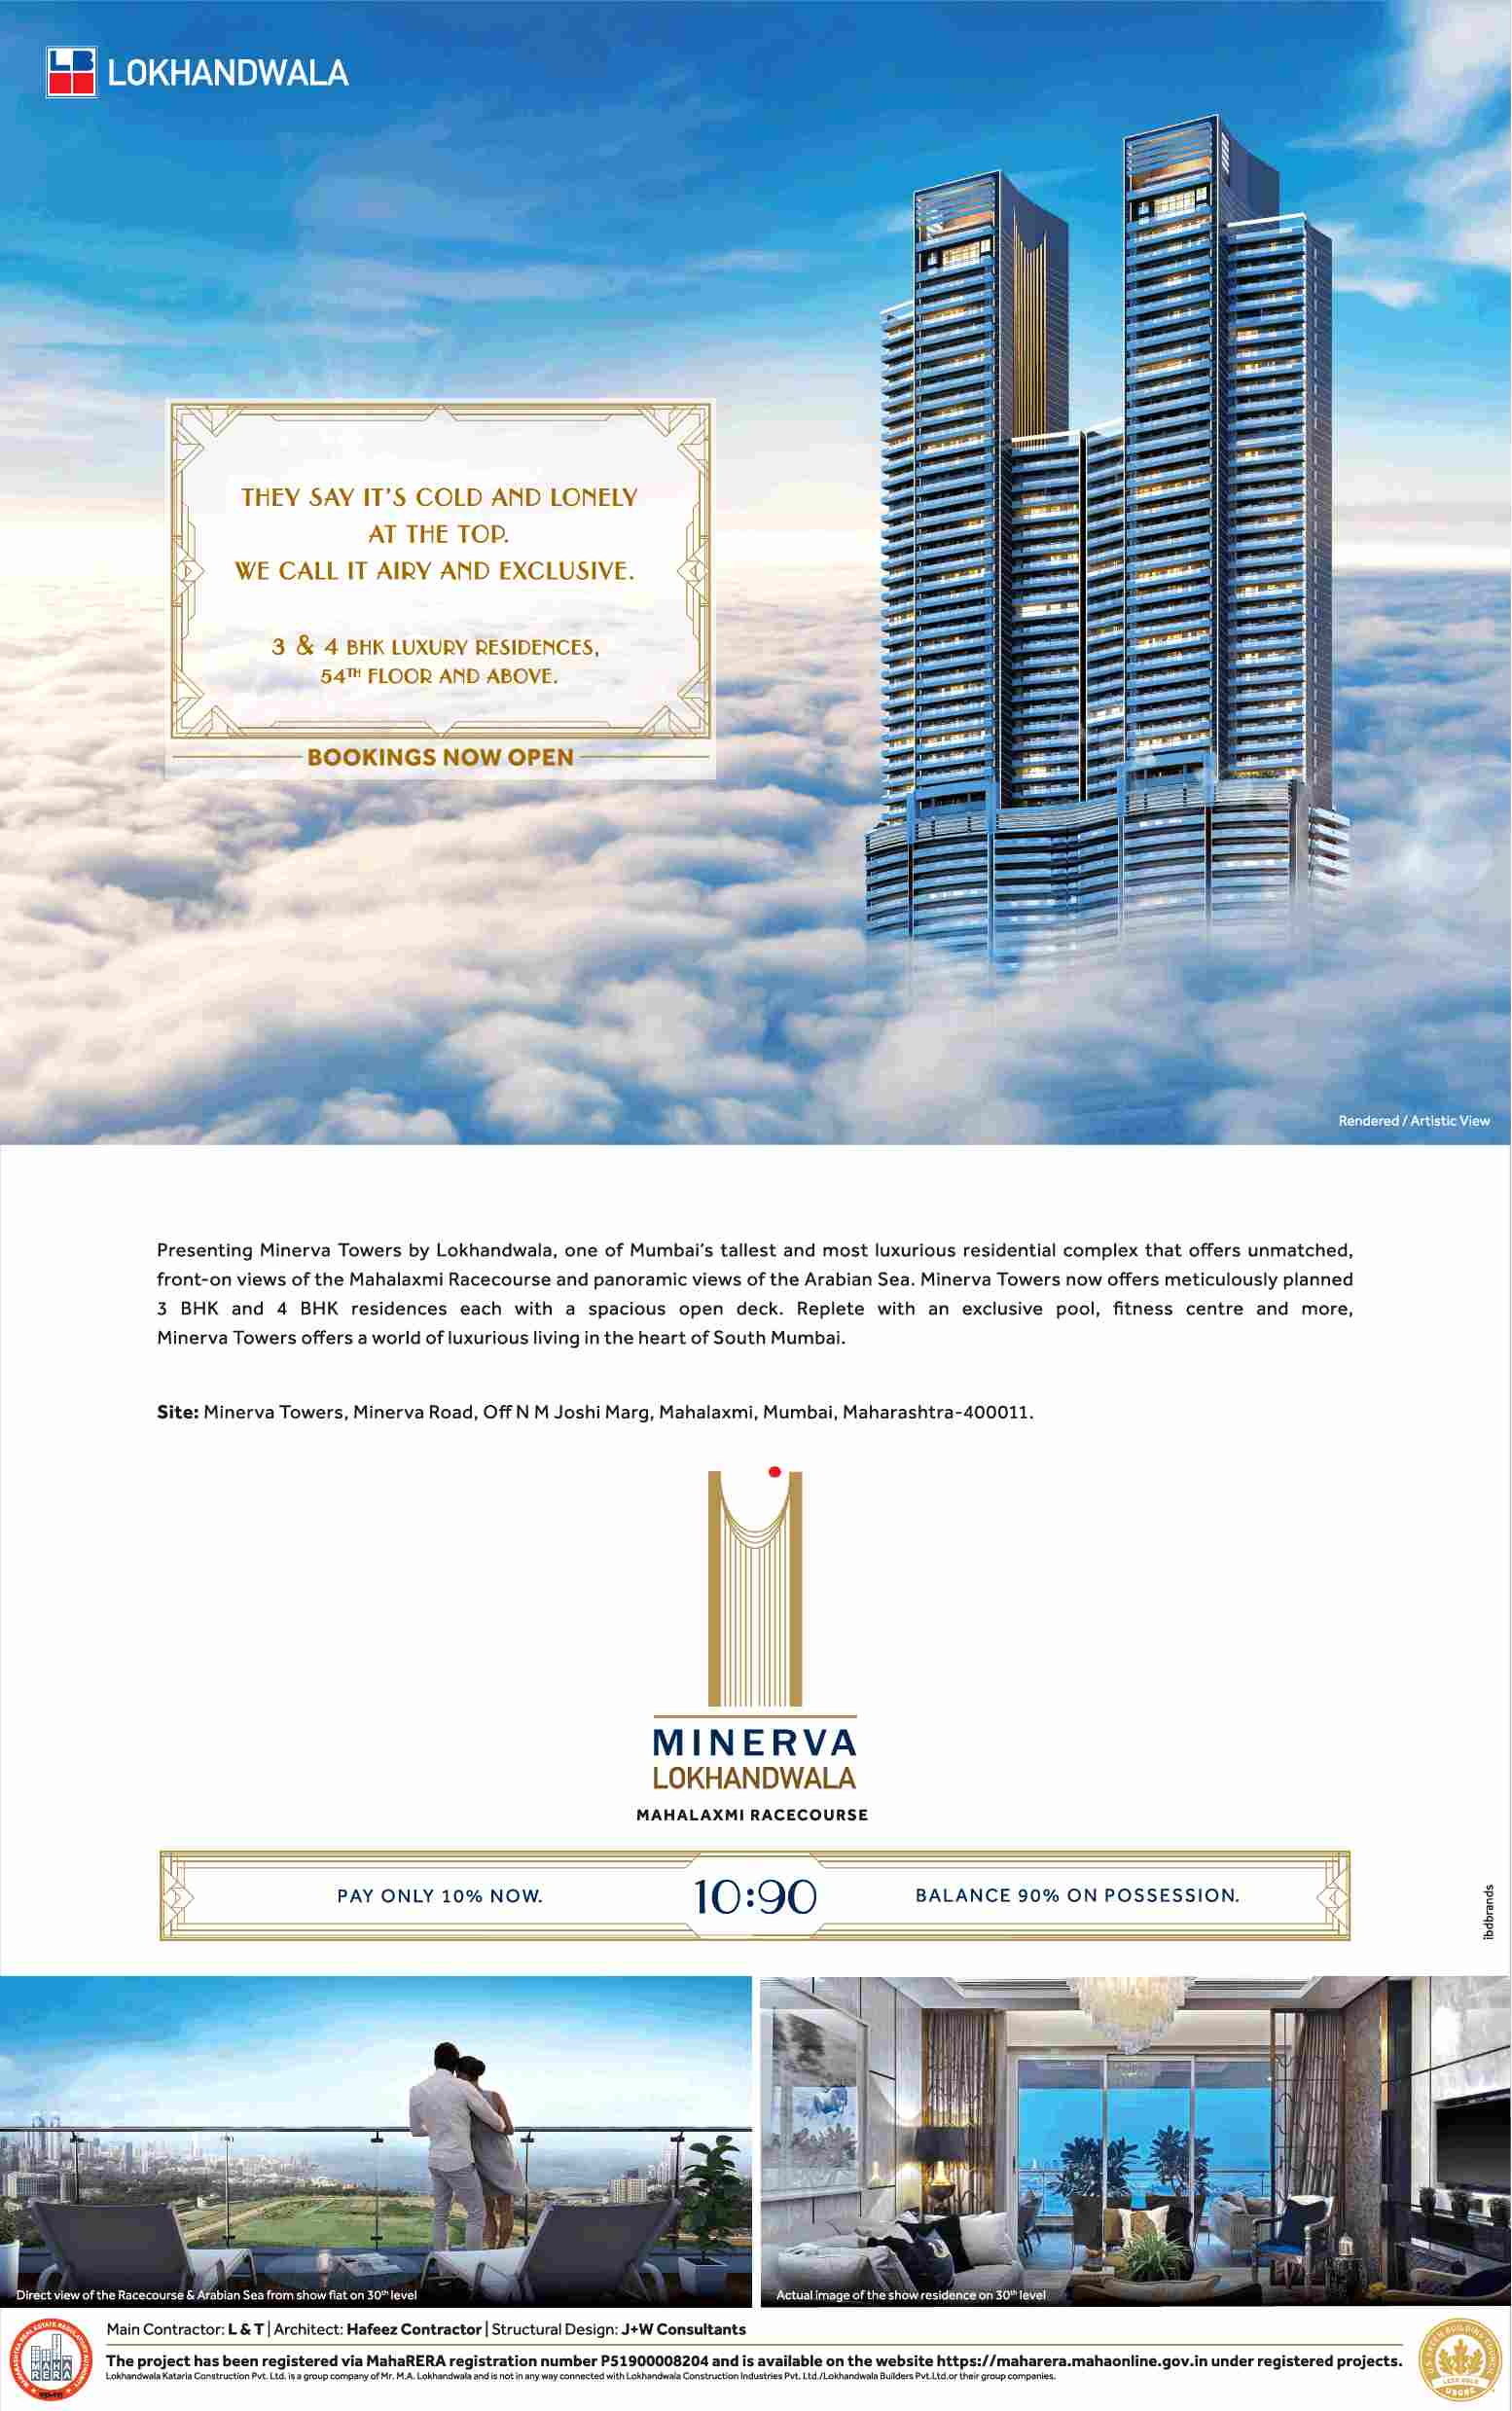 Pay only 10% now and book your home at Lokhandwala Minerva Towers in Mumbai Update